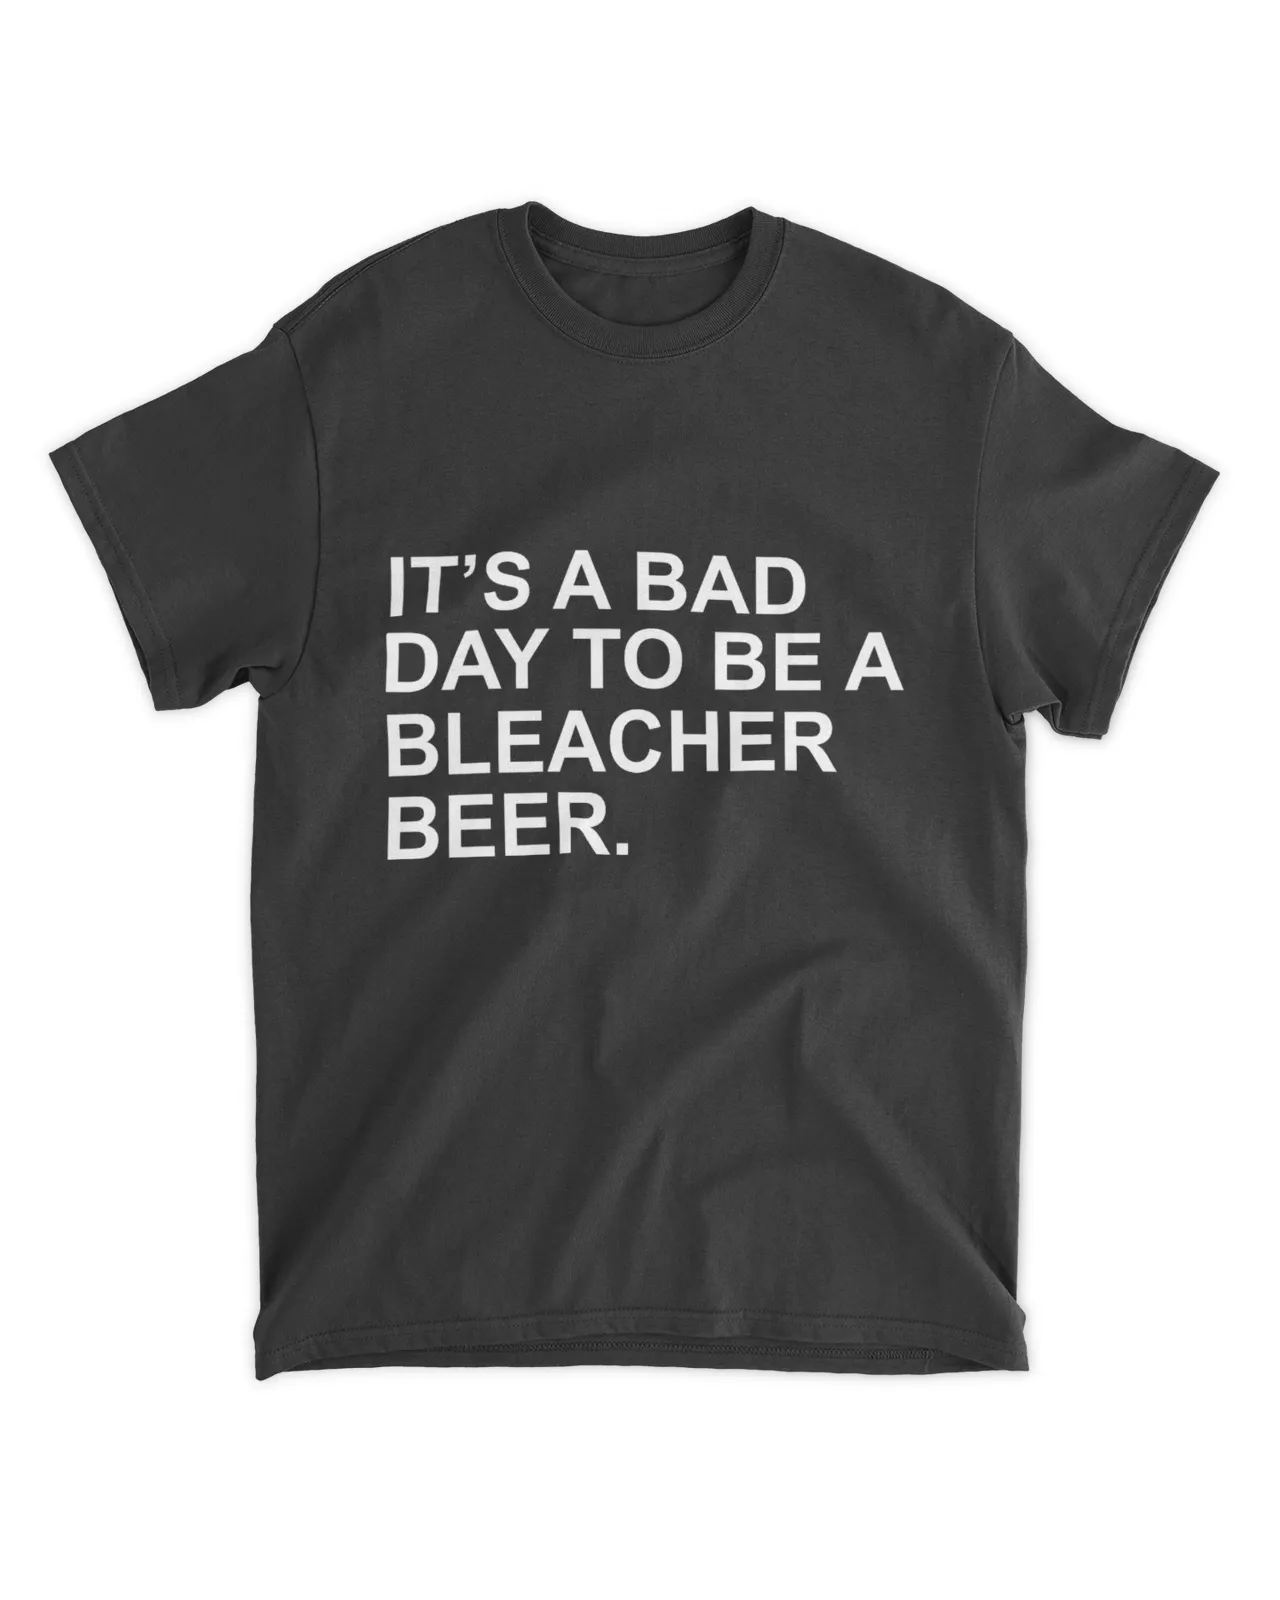 It's A Bad Day To Be A Bleacher Beer Shirt 